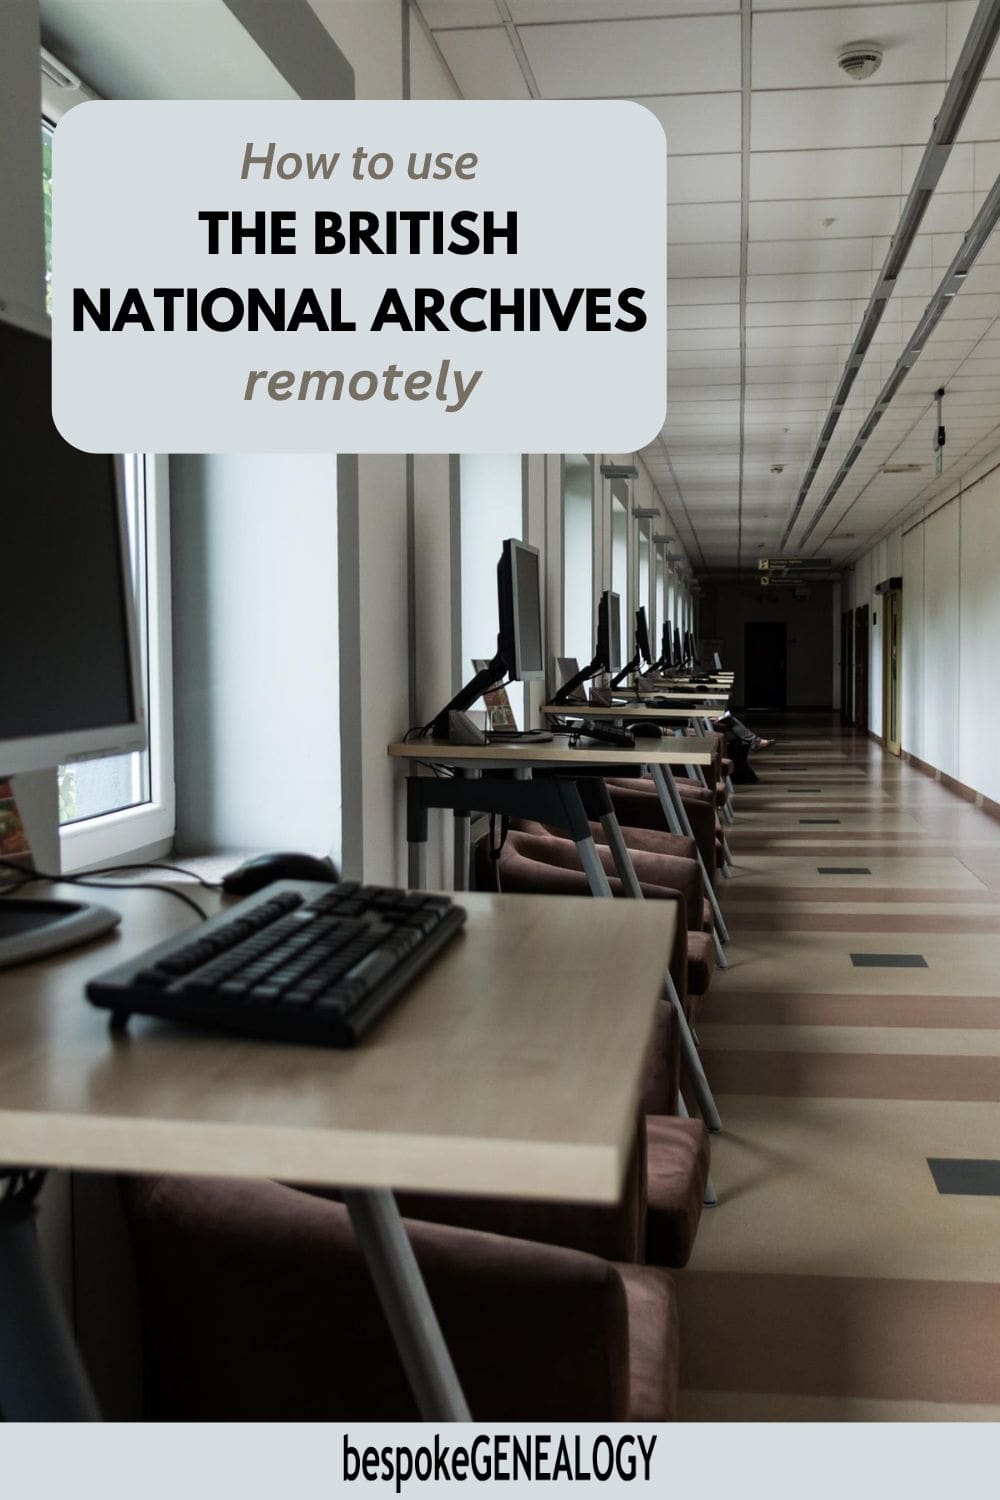 How to use the British National Archives Remotely. Photo of some computer terminals in an Archive.